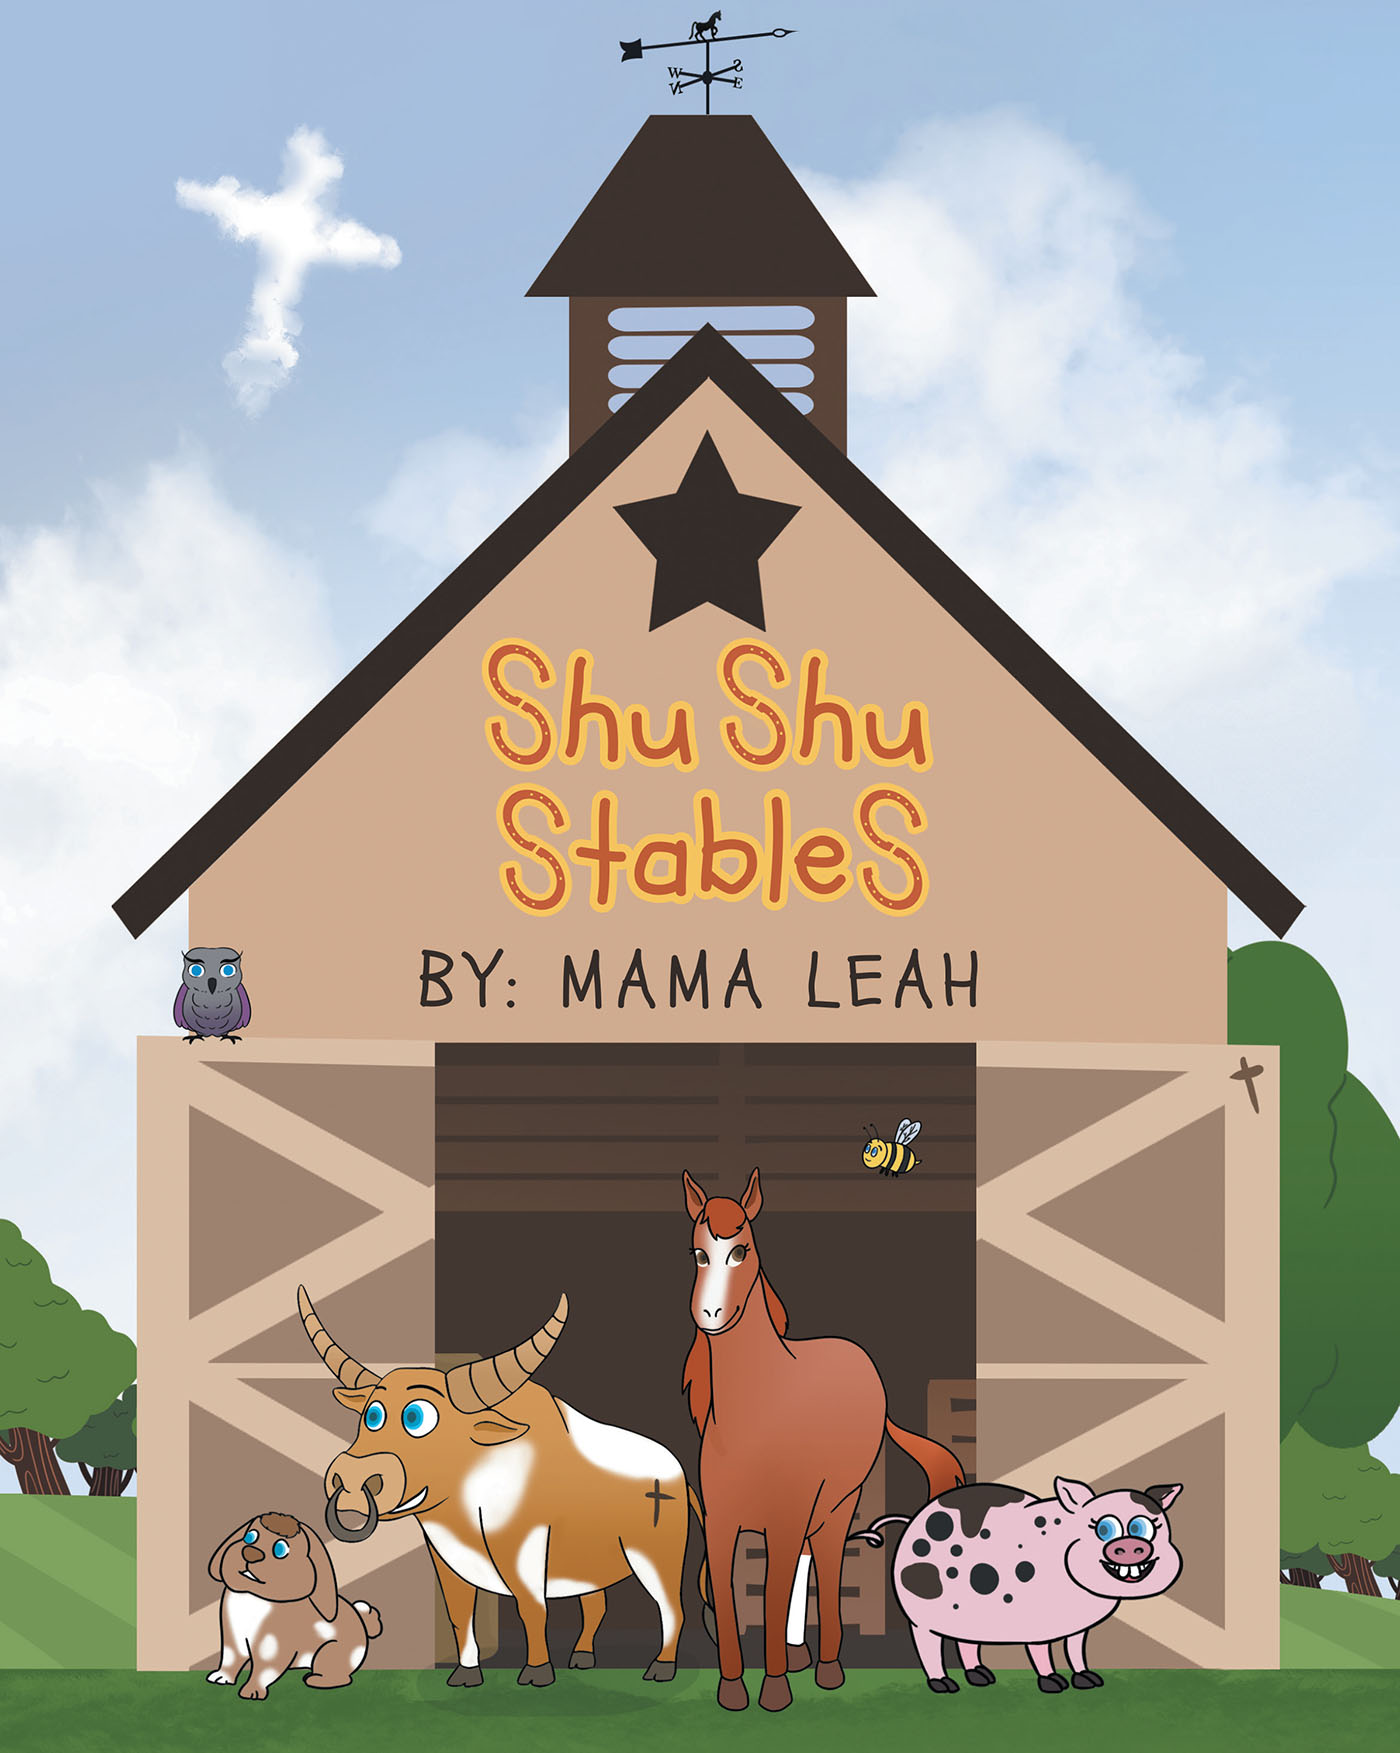 Mama Leah’s Newly Released "Shu Shu Stables" is a Charming Tale of a Special Farm and an Important Day That Taught a Powerful Lesson